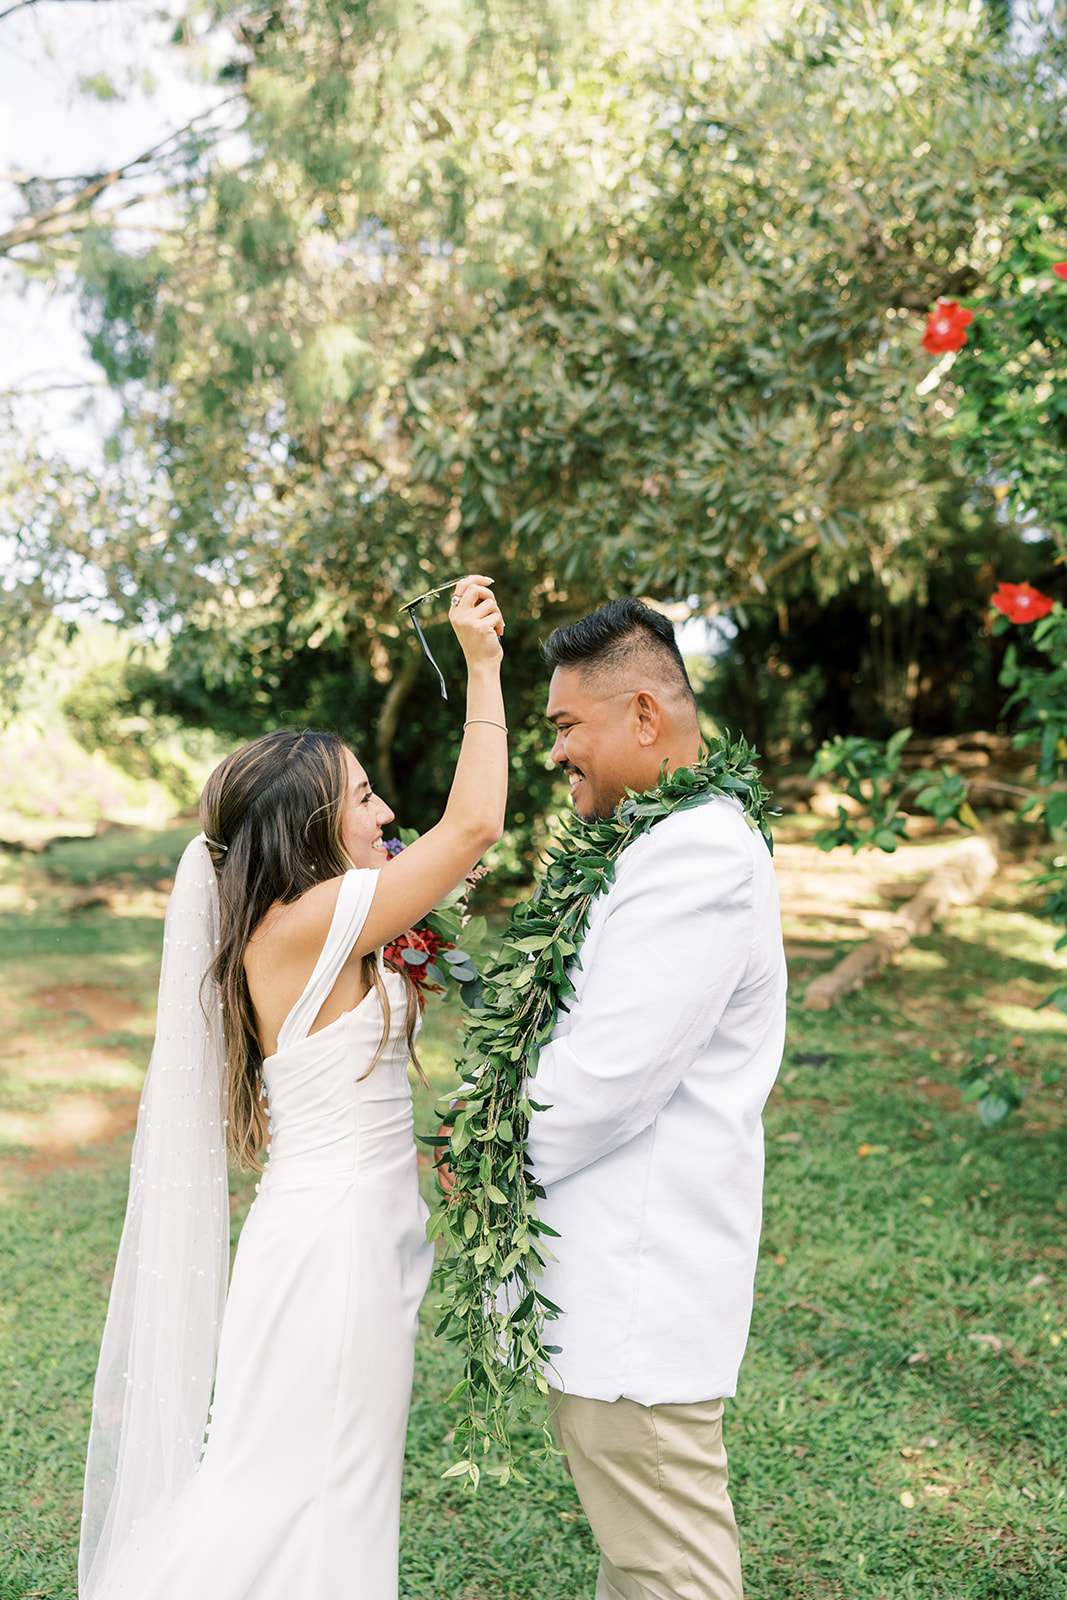 A bride placing a floral garland over the head of a smiling groom during their Hawaiian Wedding